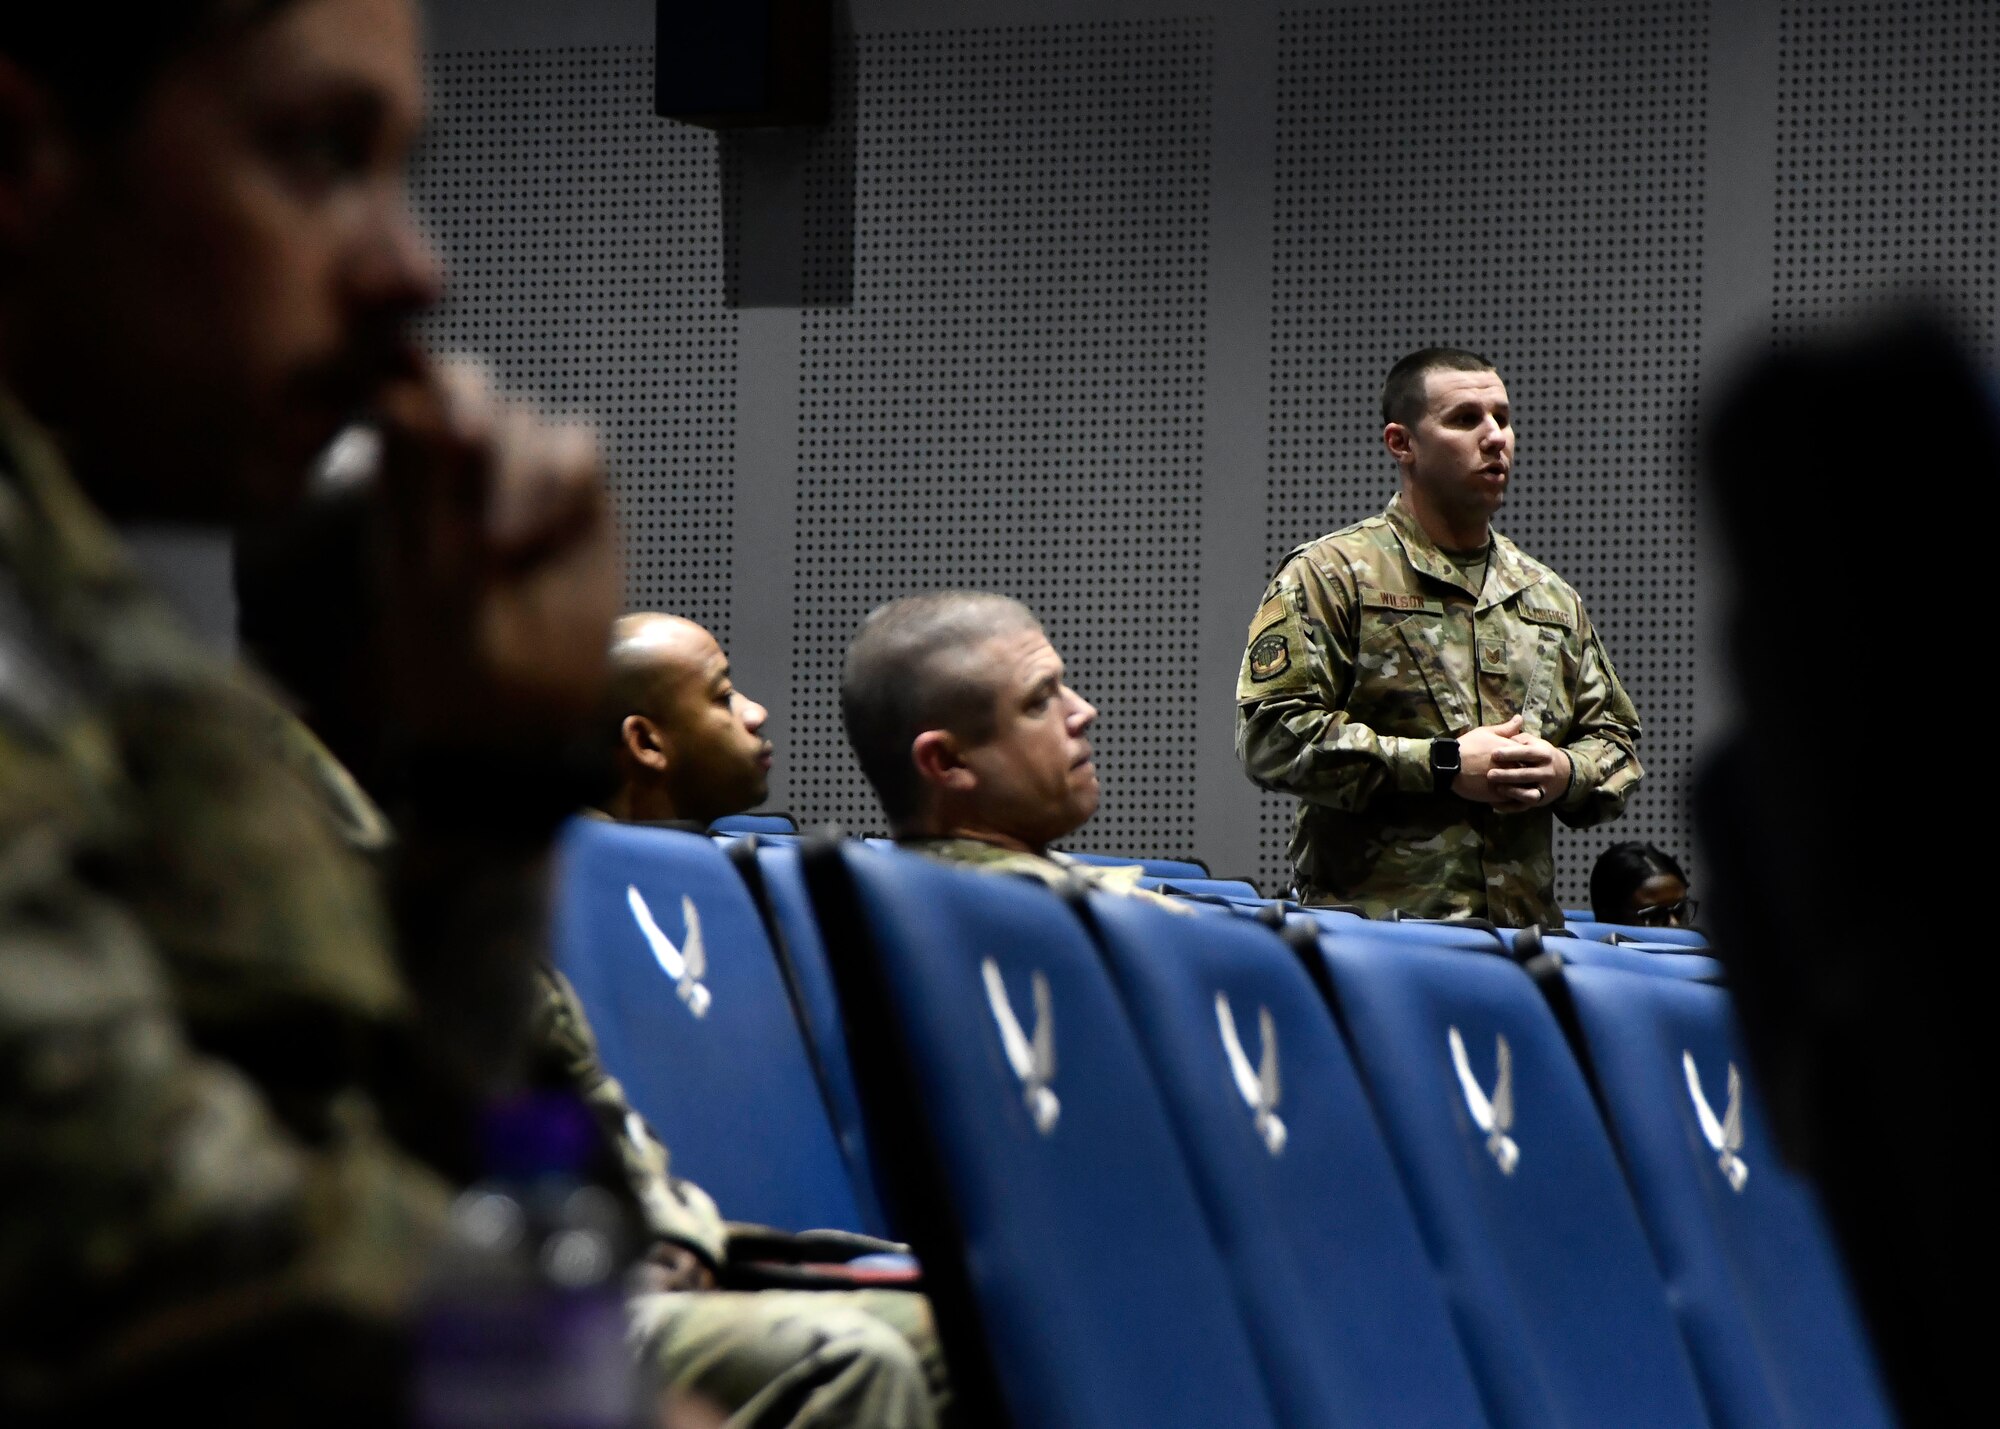 Airmen participate in group discussion.